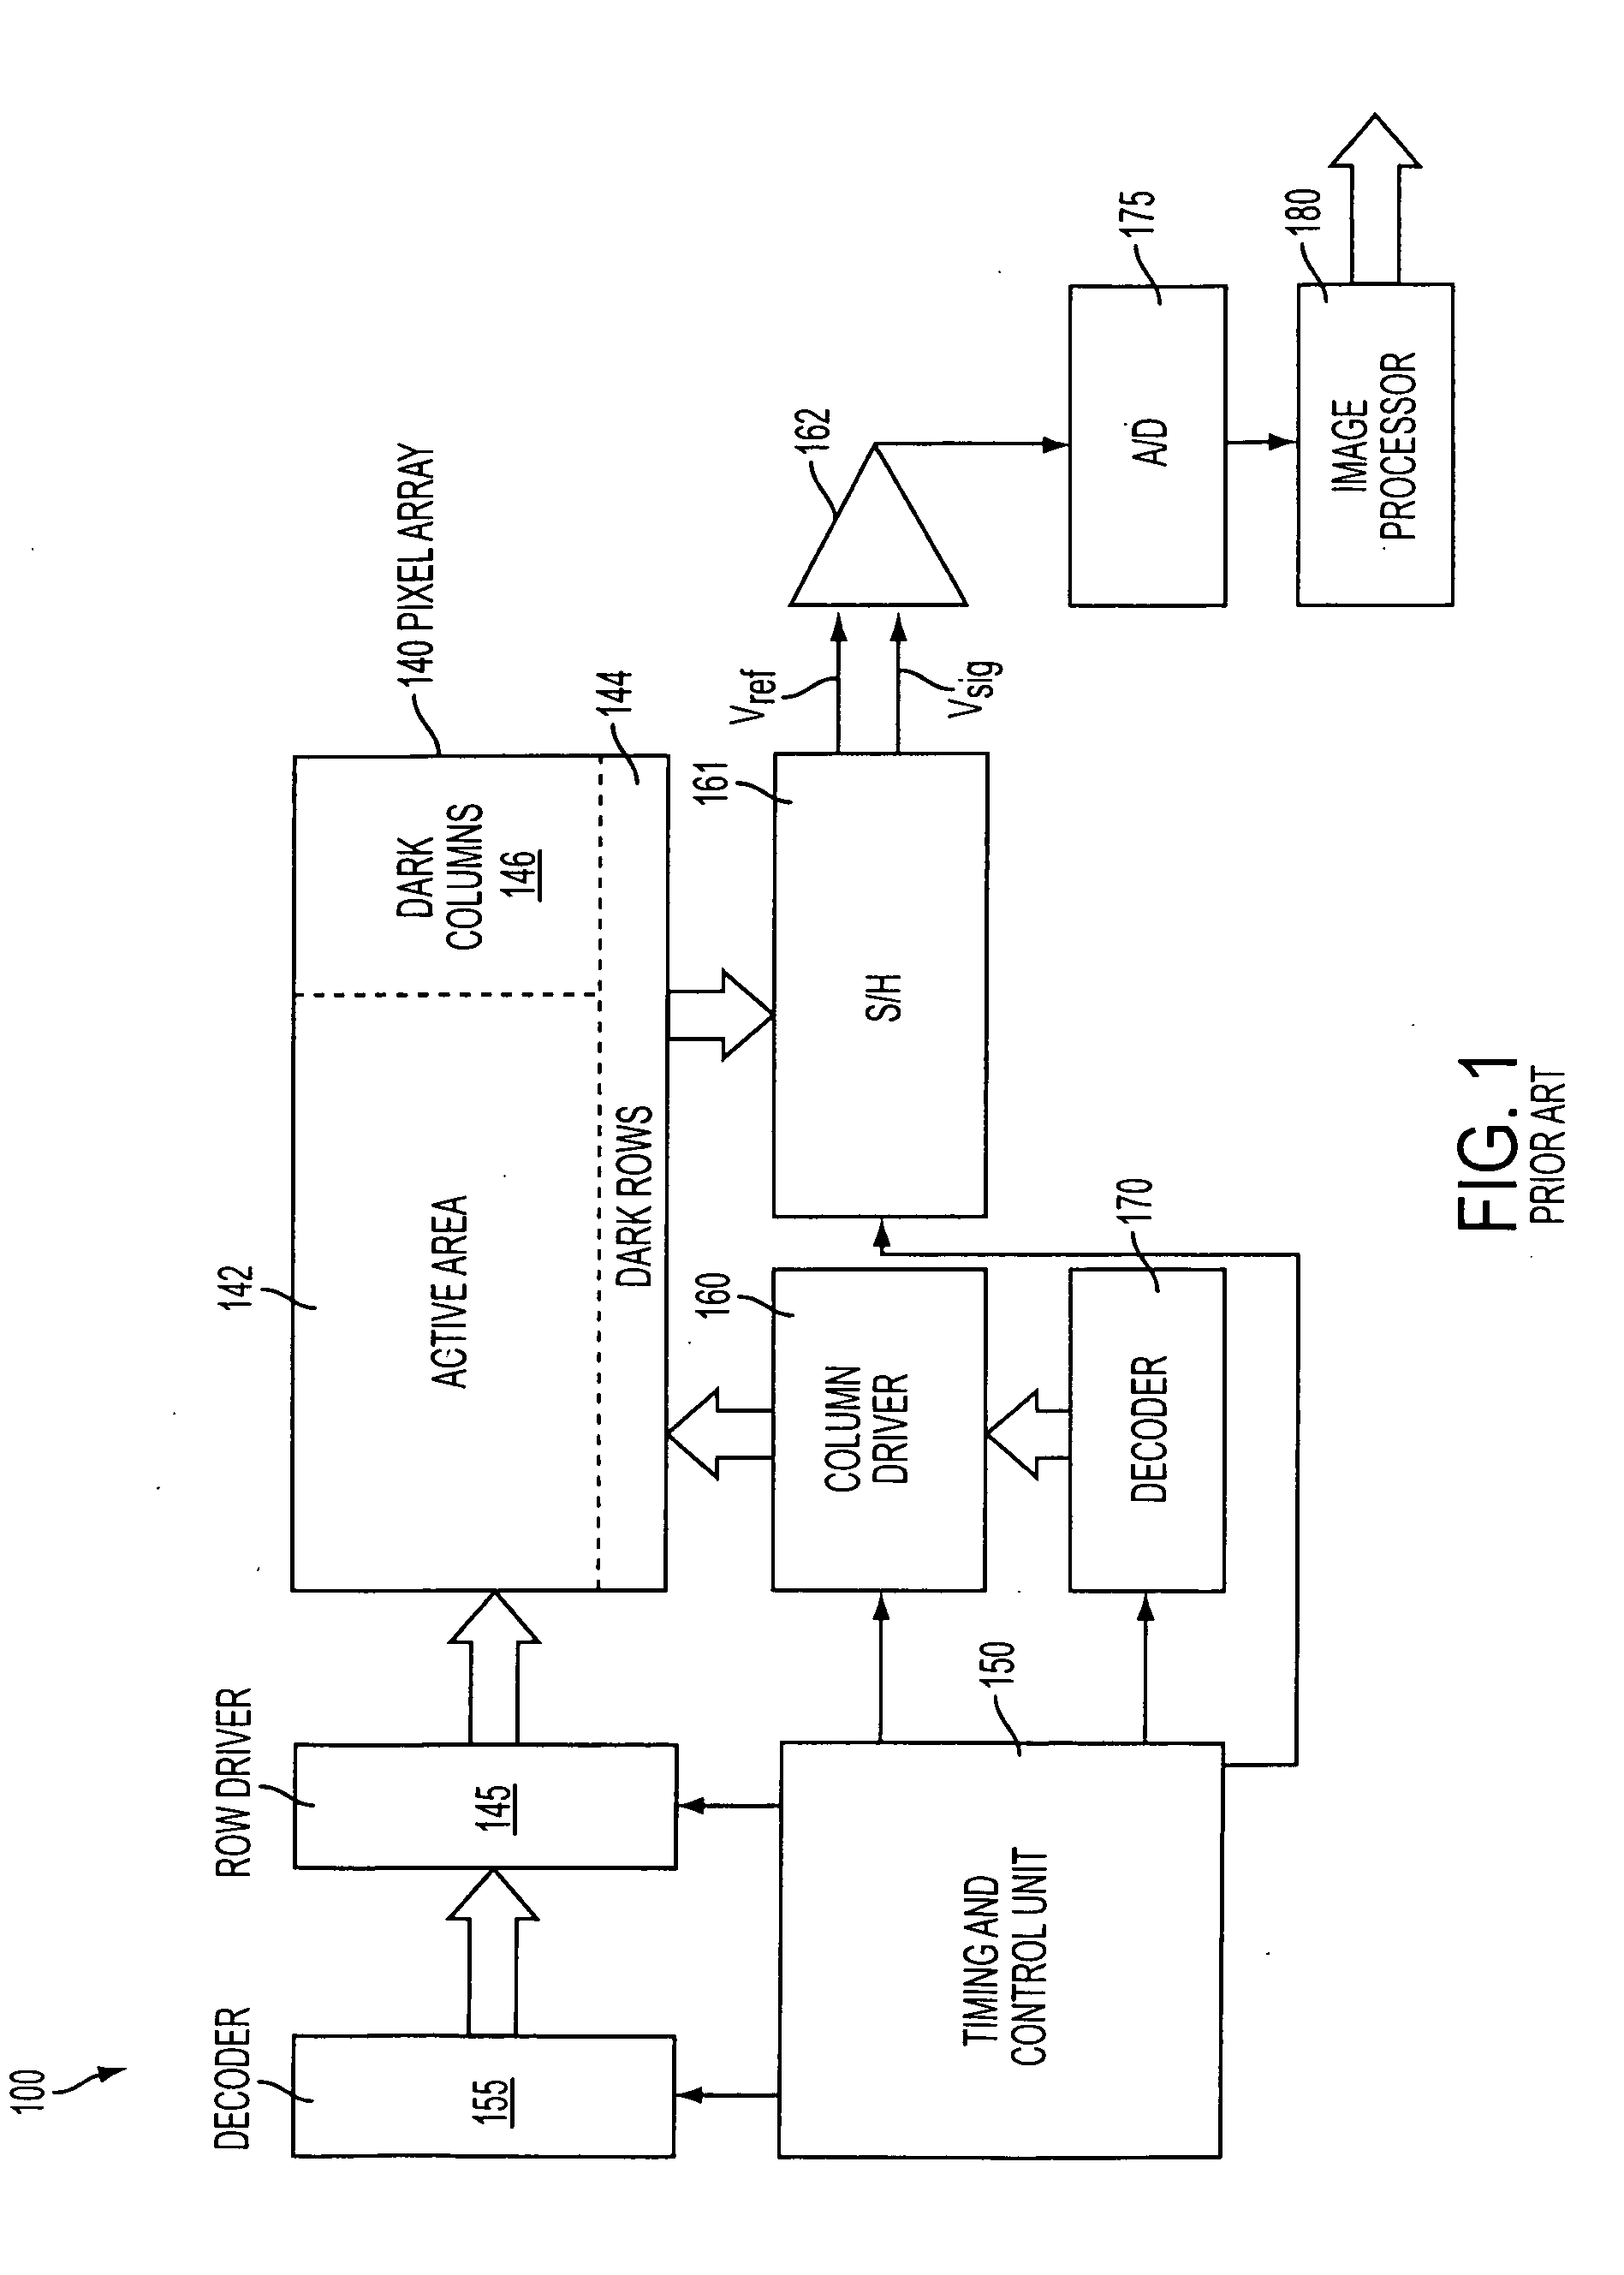 Image sensor with built-in thermometer for global black level calibration and temperature-dependent color correction